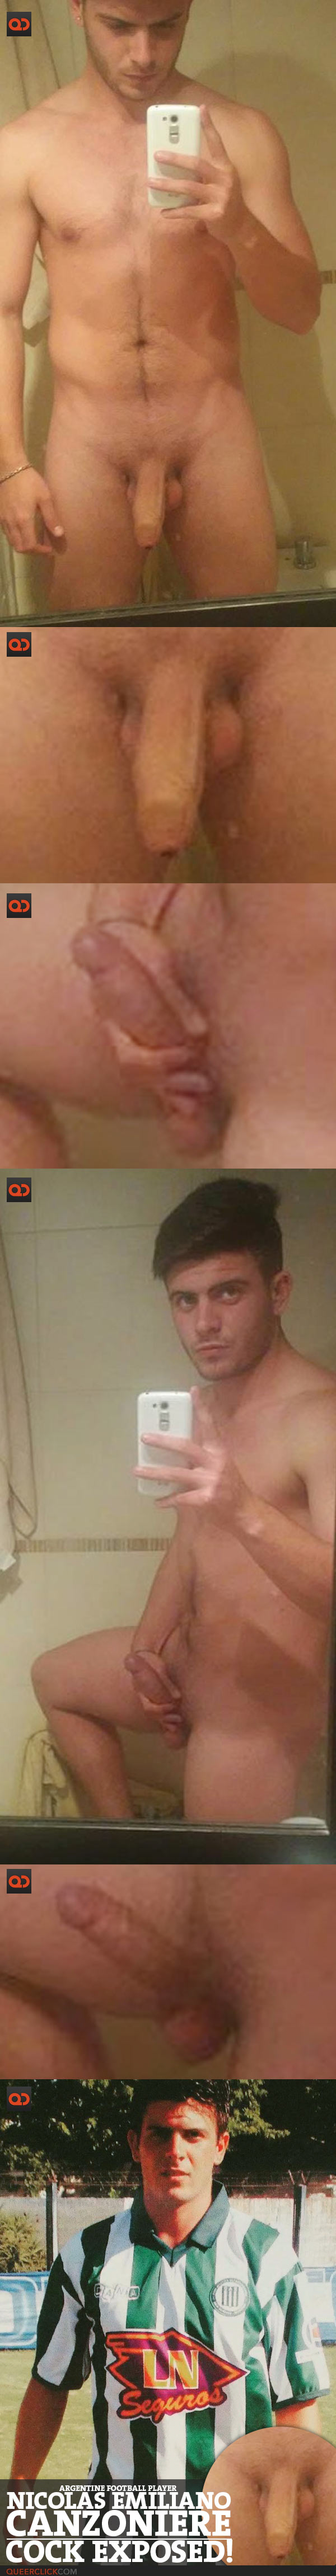 Nicolás Emiliano Canzoniere, Argentine Football Player, Cock Exposed!